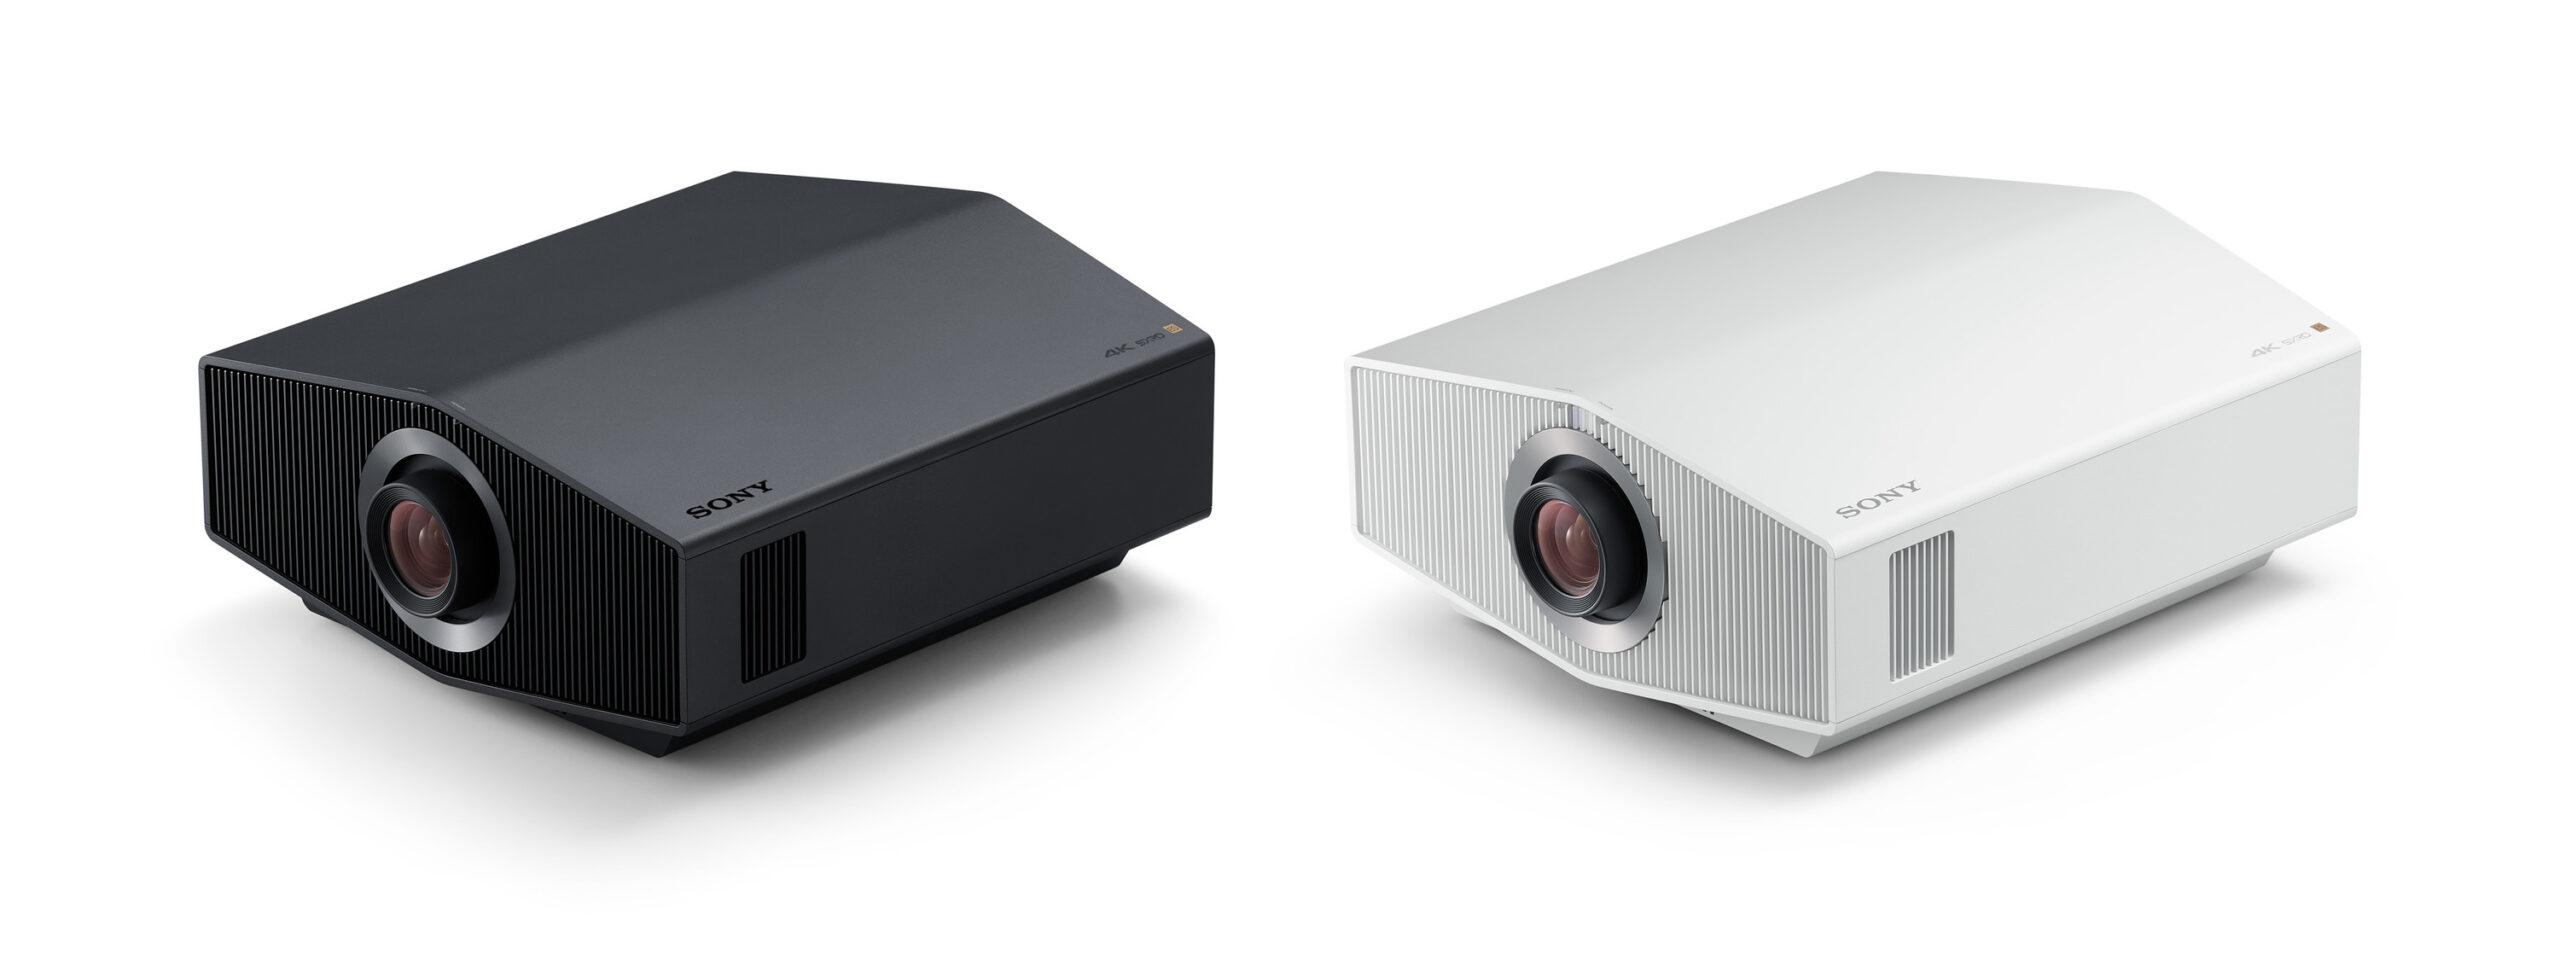 This is no mere annual refresh. Sony's three new home theater projectors are a generational leap forward. f185199e vplxw6000 others 220201 015 large scaled